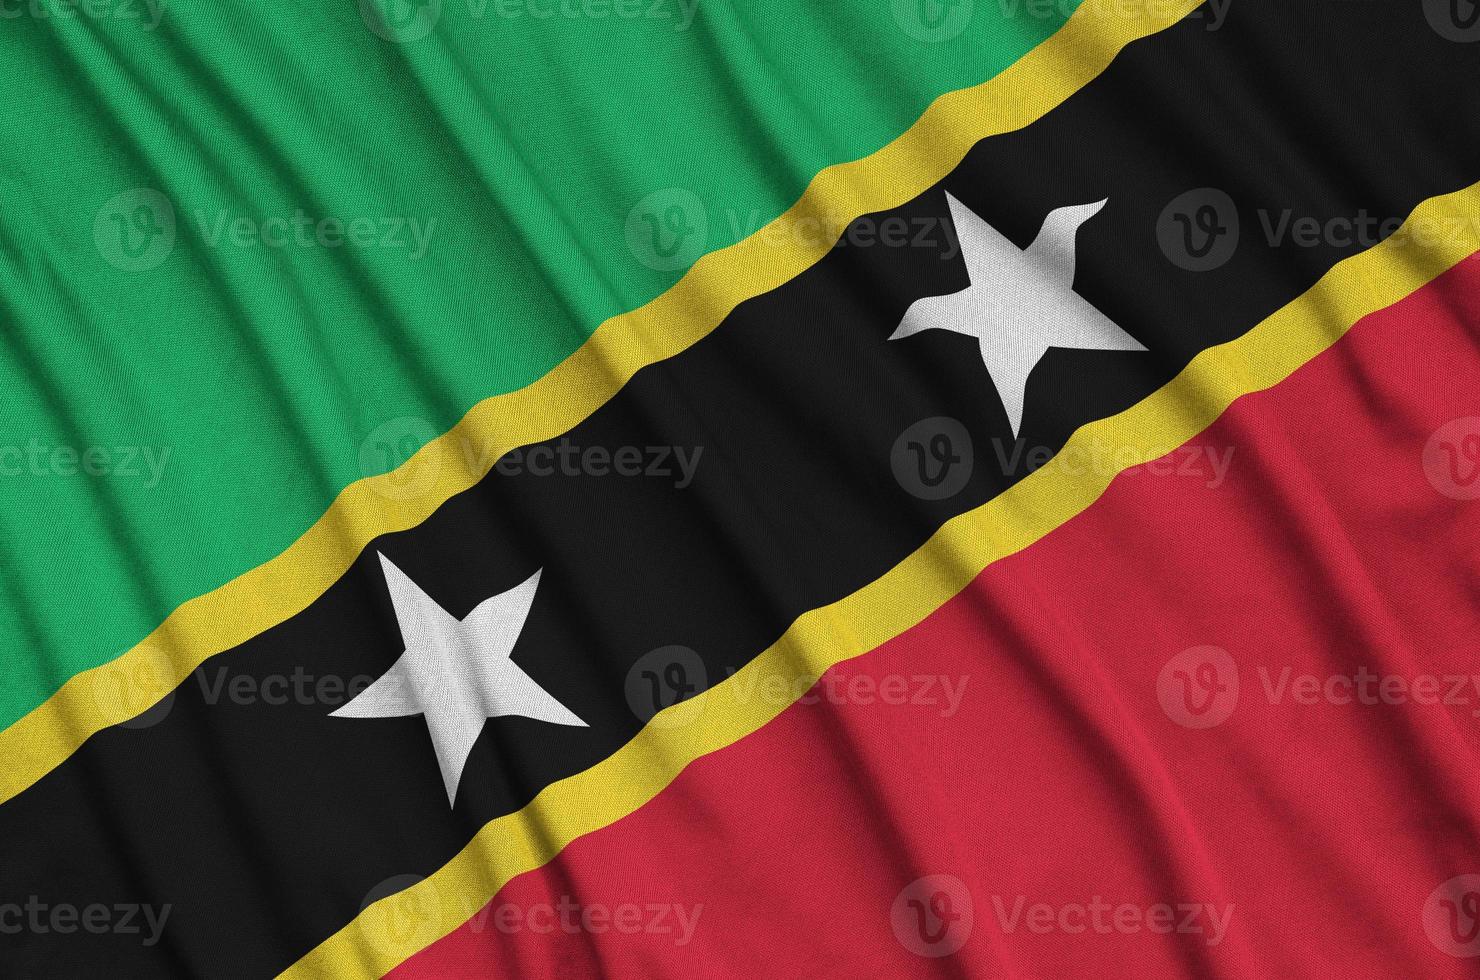 Saint Kitts and Nevis flag  is depicted on a sports cloth fabric with many folds. Sport team banner photo